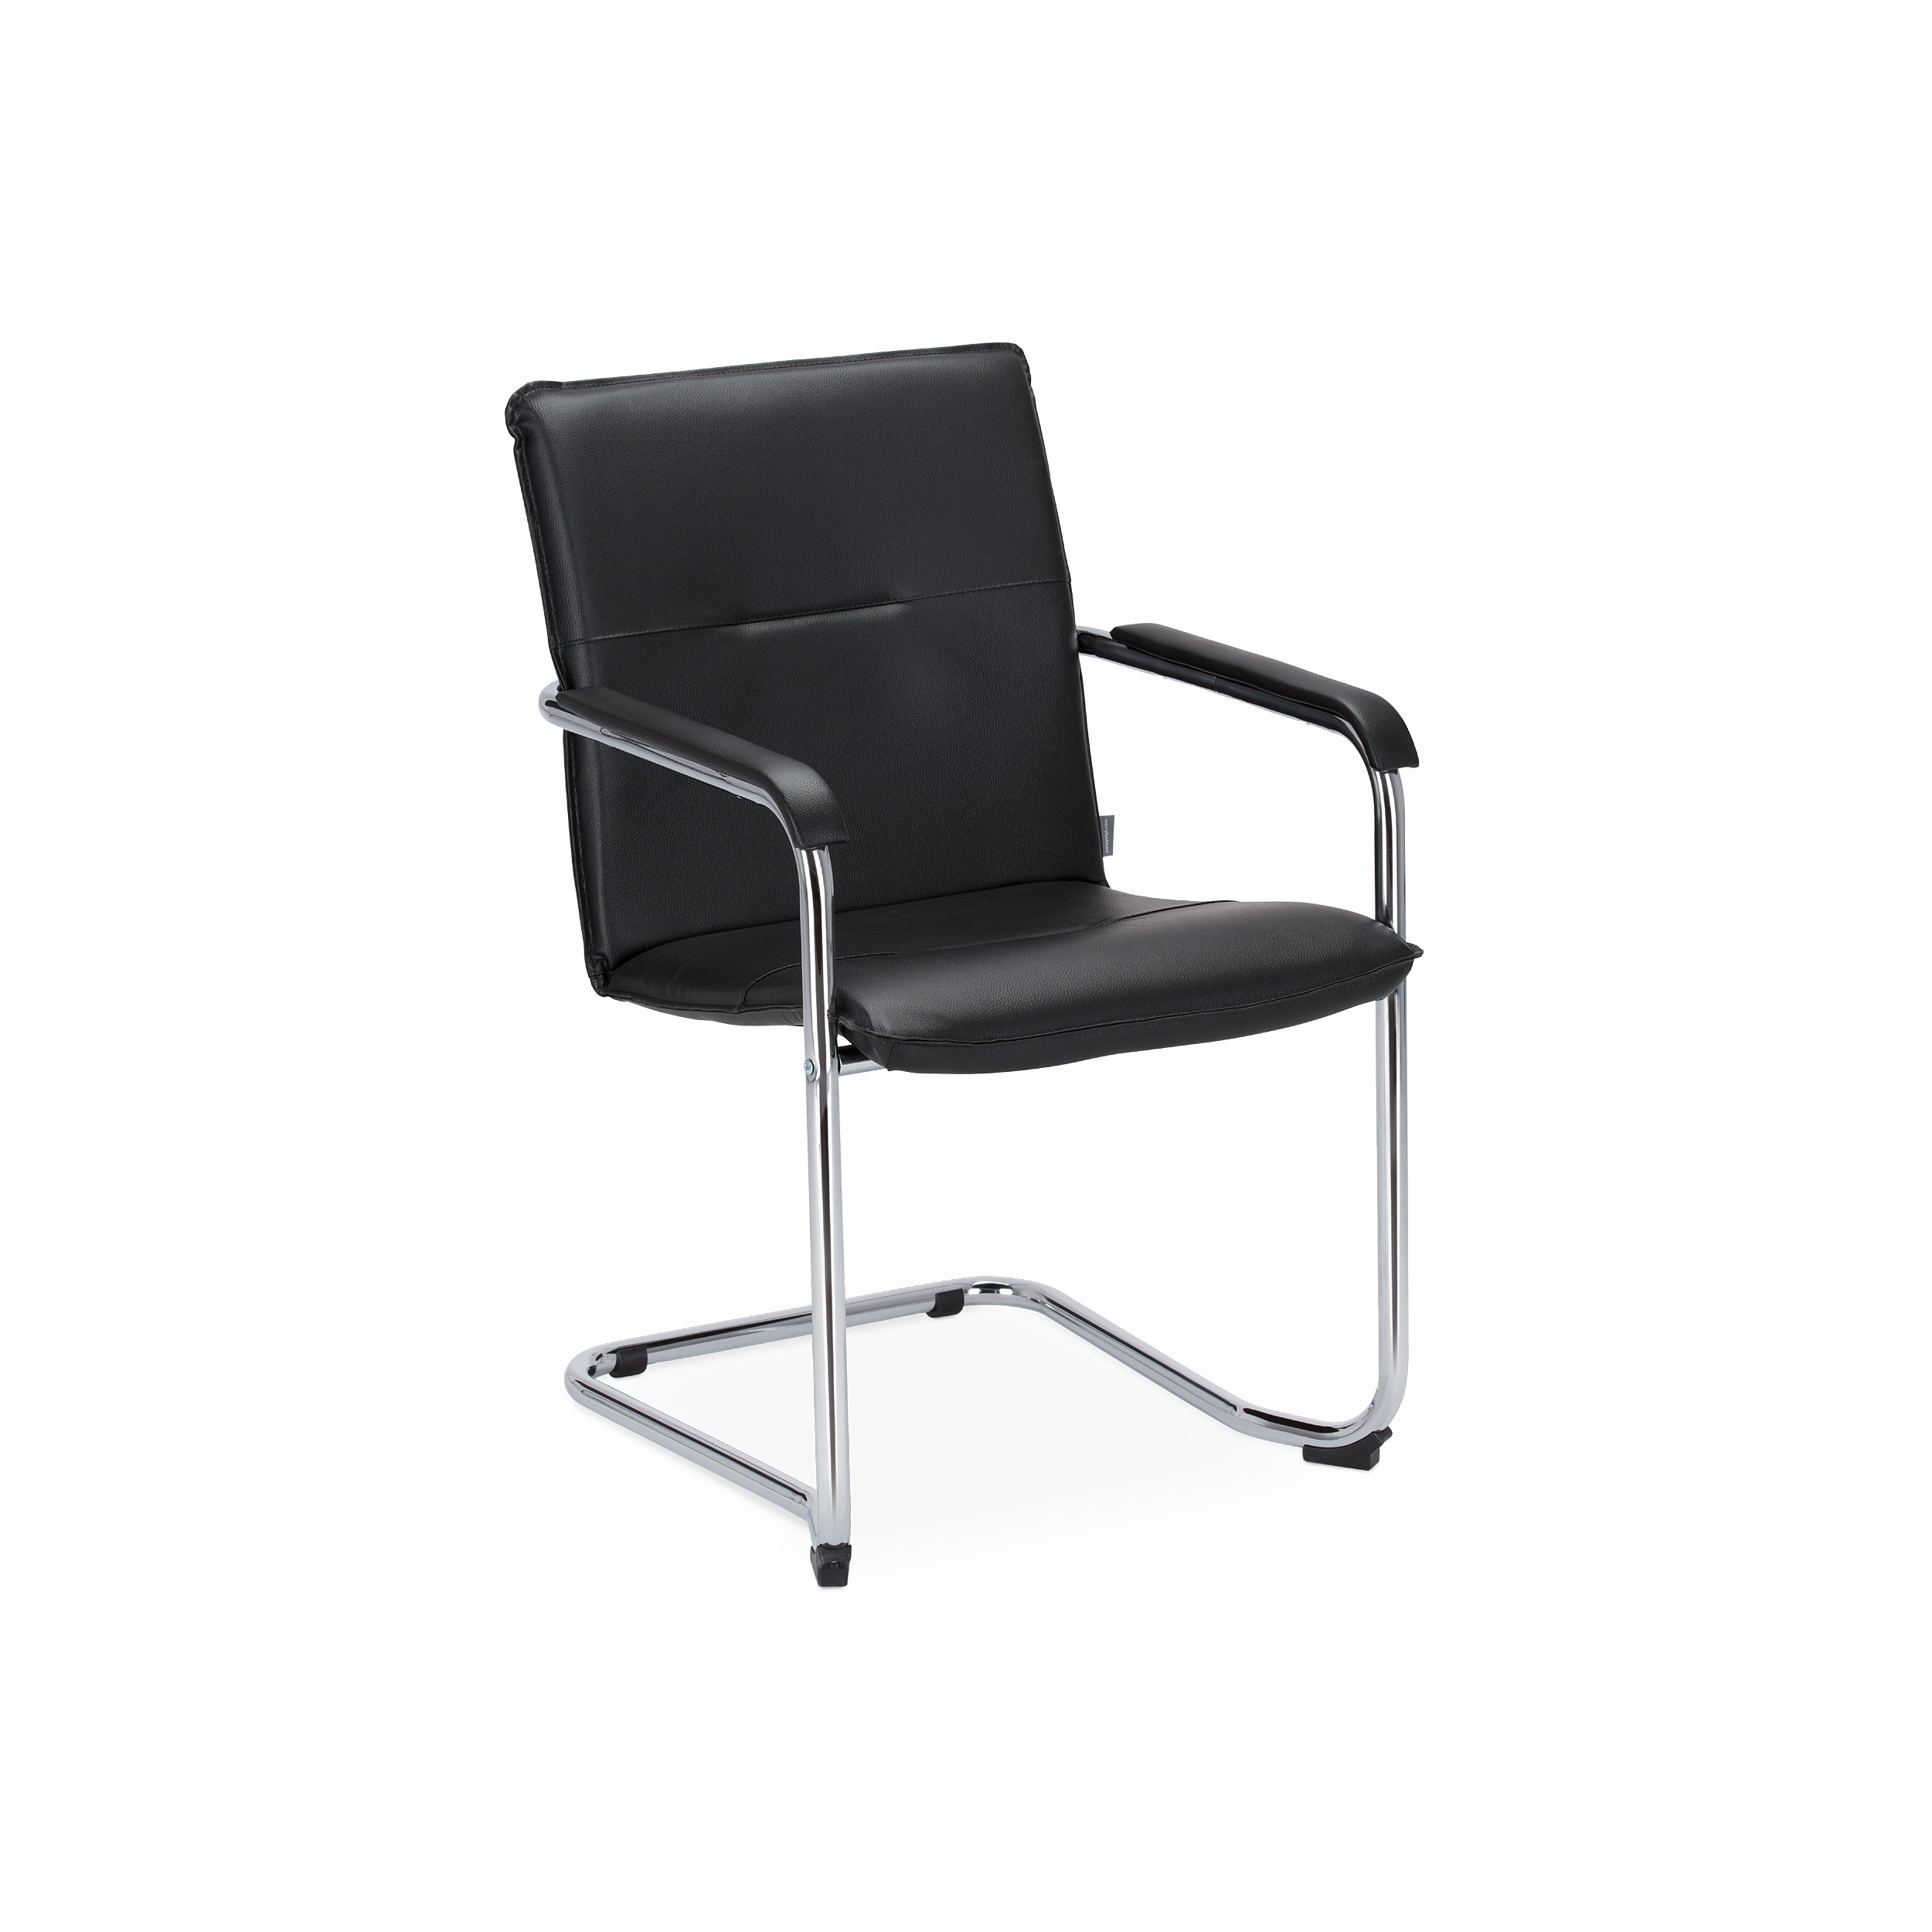 homensglemonskyplhtdocsimportdataproductsoffice-chairsrumba04_specification04-01_product-range_d1ord2office-chairs_1-1_rumba-2-1.jpg